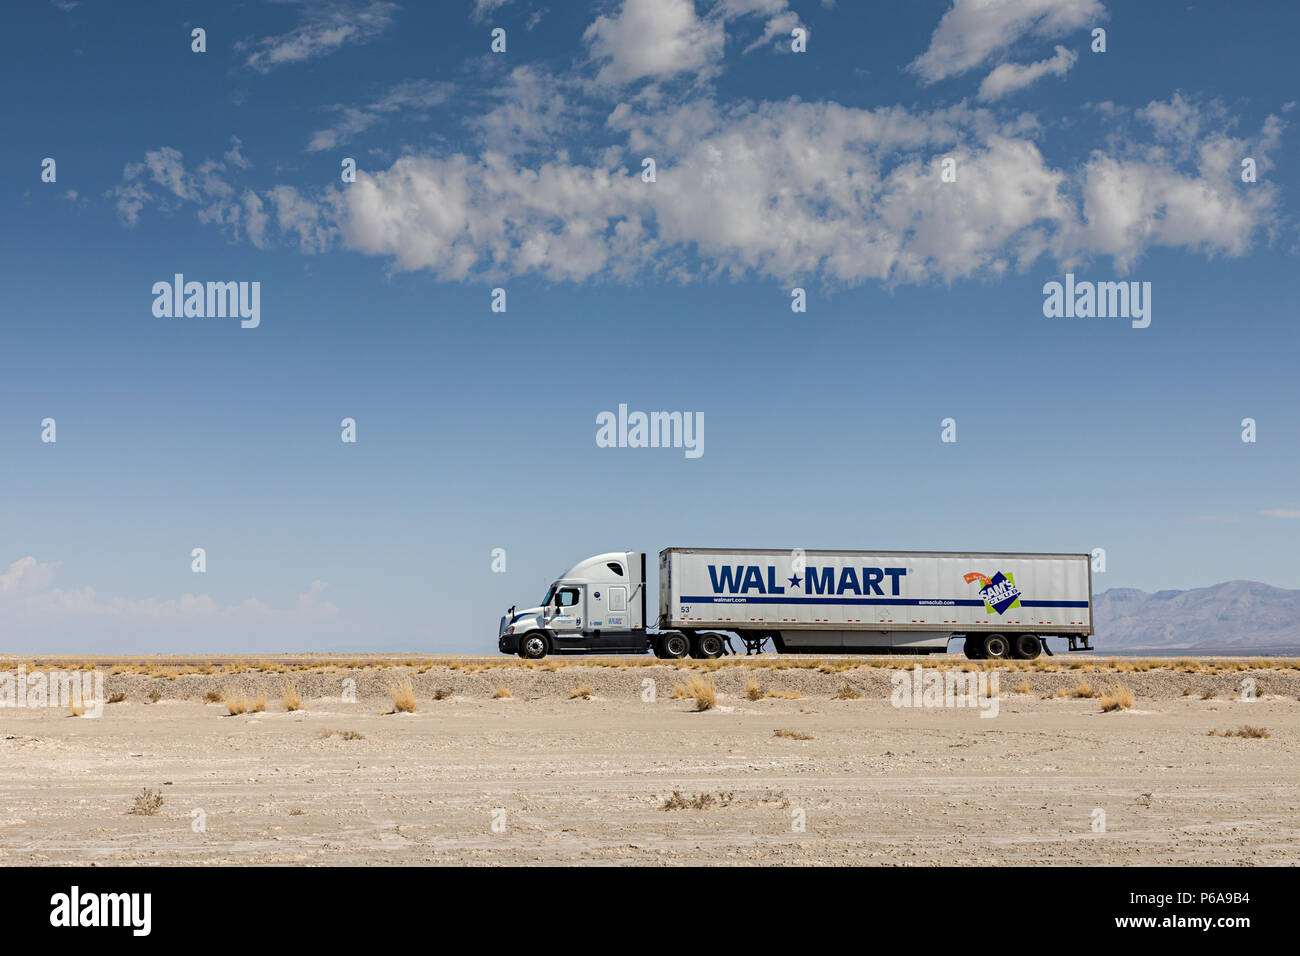 Wal Mart lorry crossing the Chihuahuan desert, New Mexico, USA Stock Photo